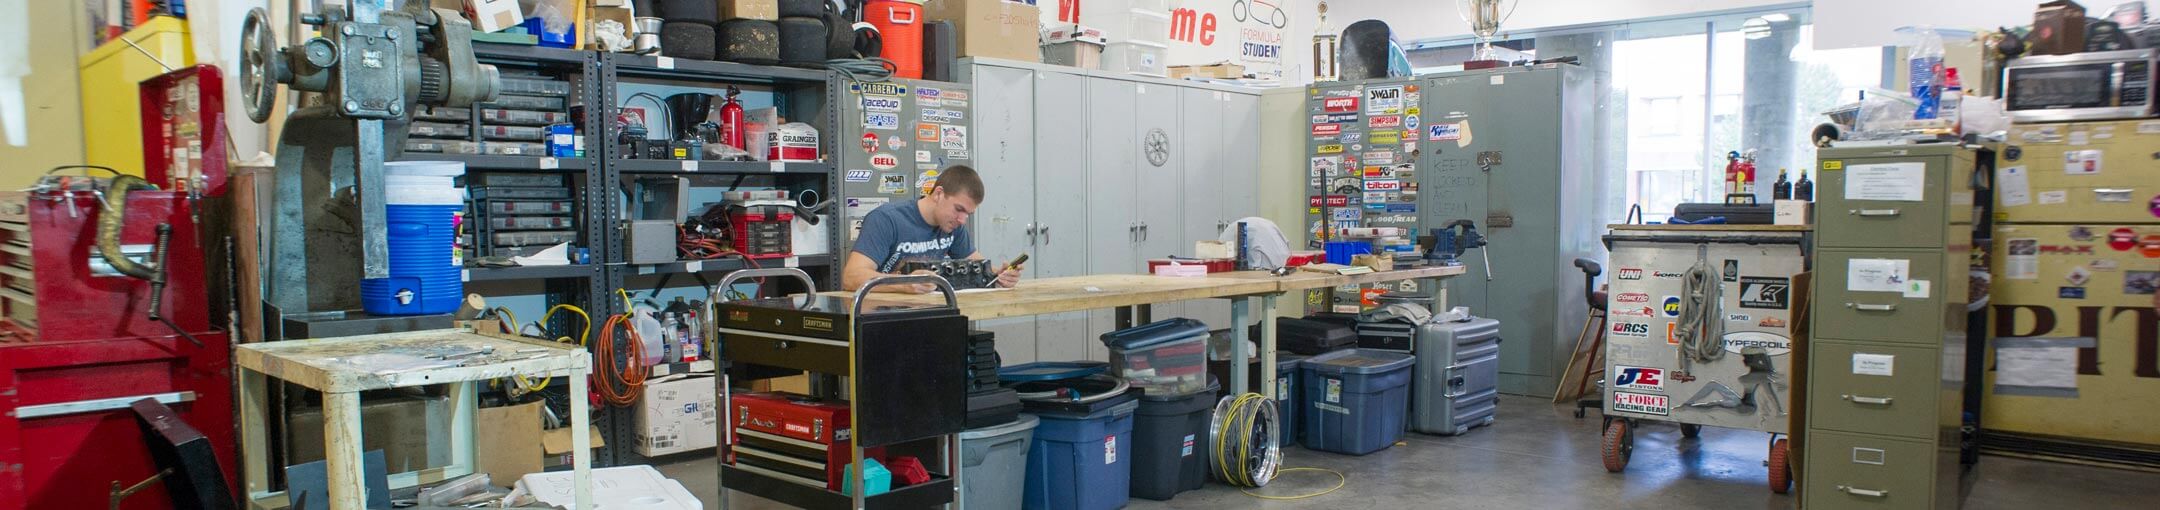 A wide angle photo of a workshop with a student sitting at a workbench.